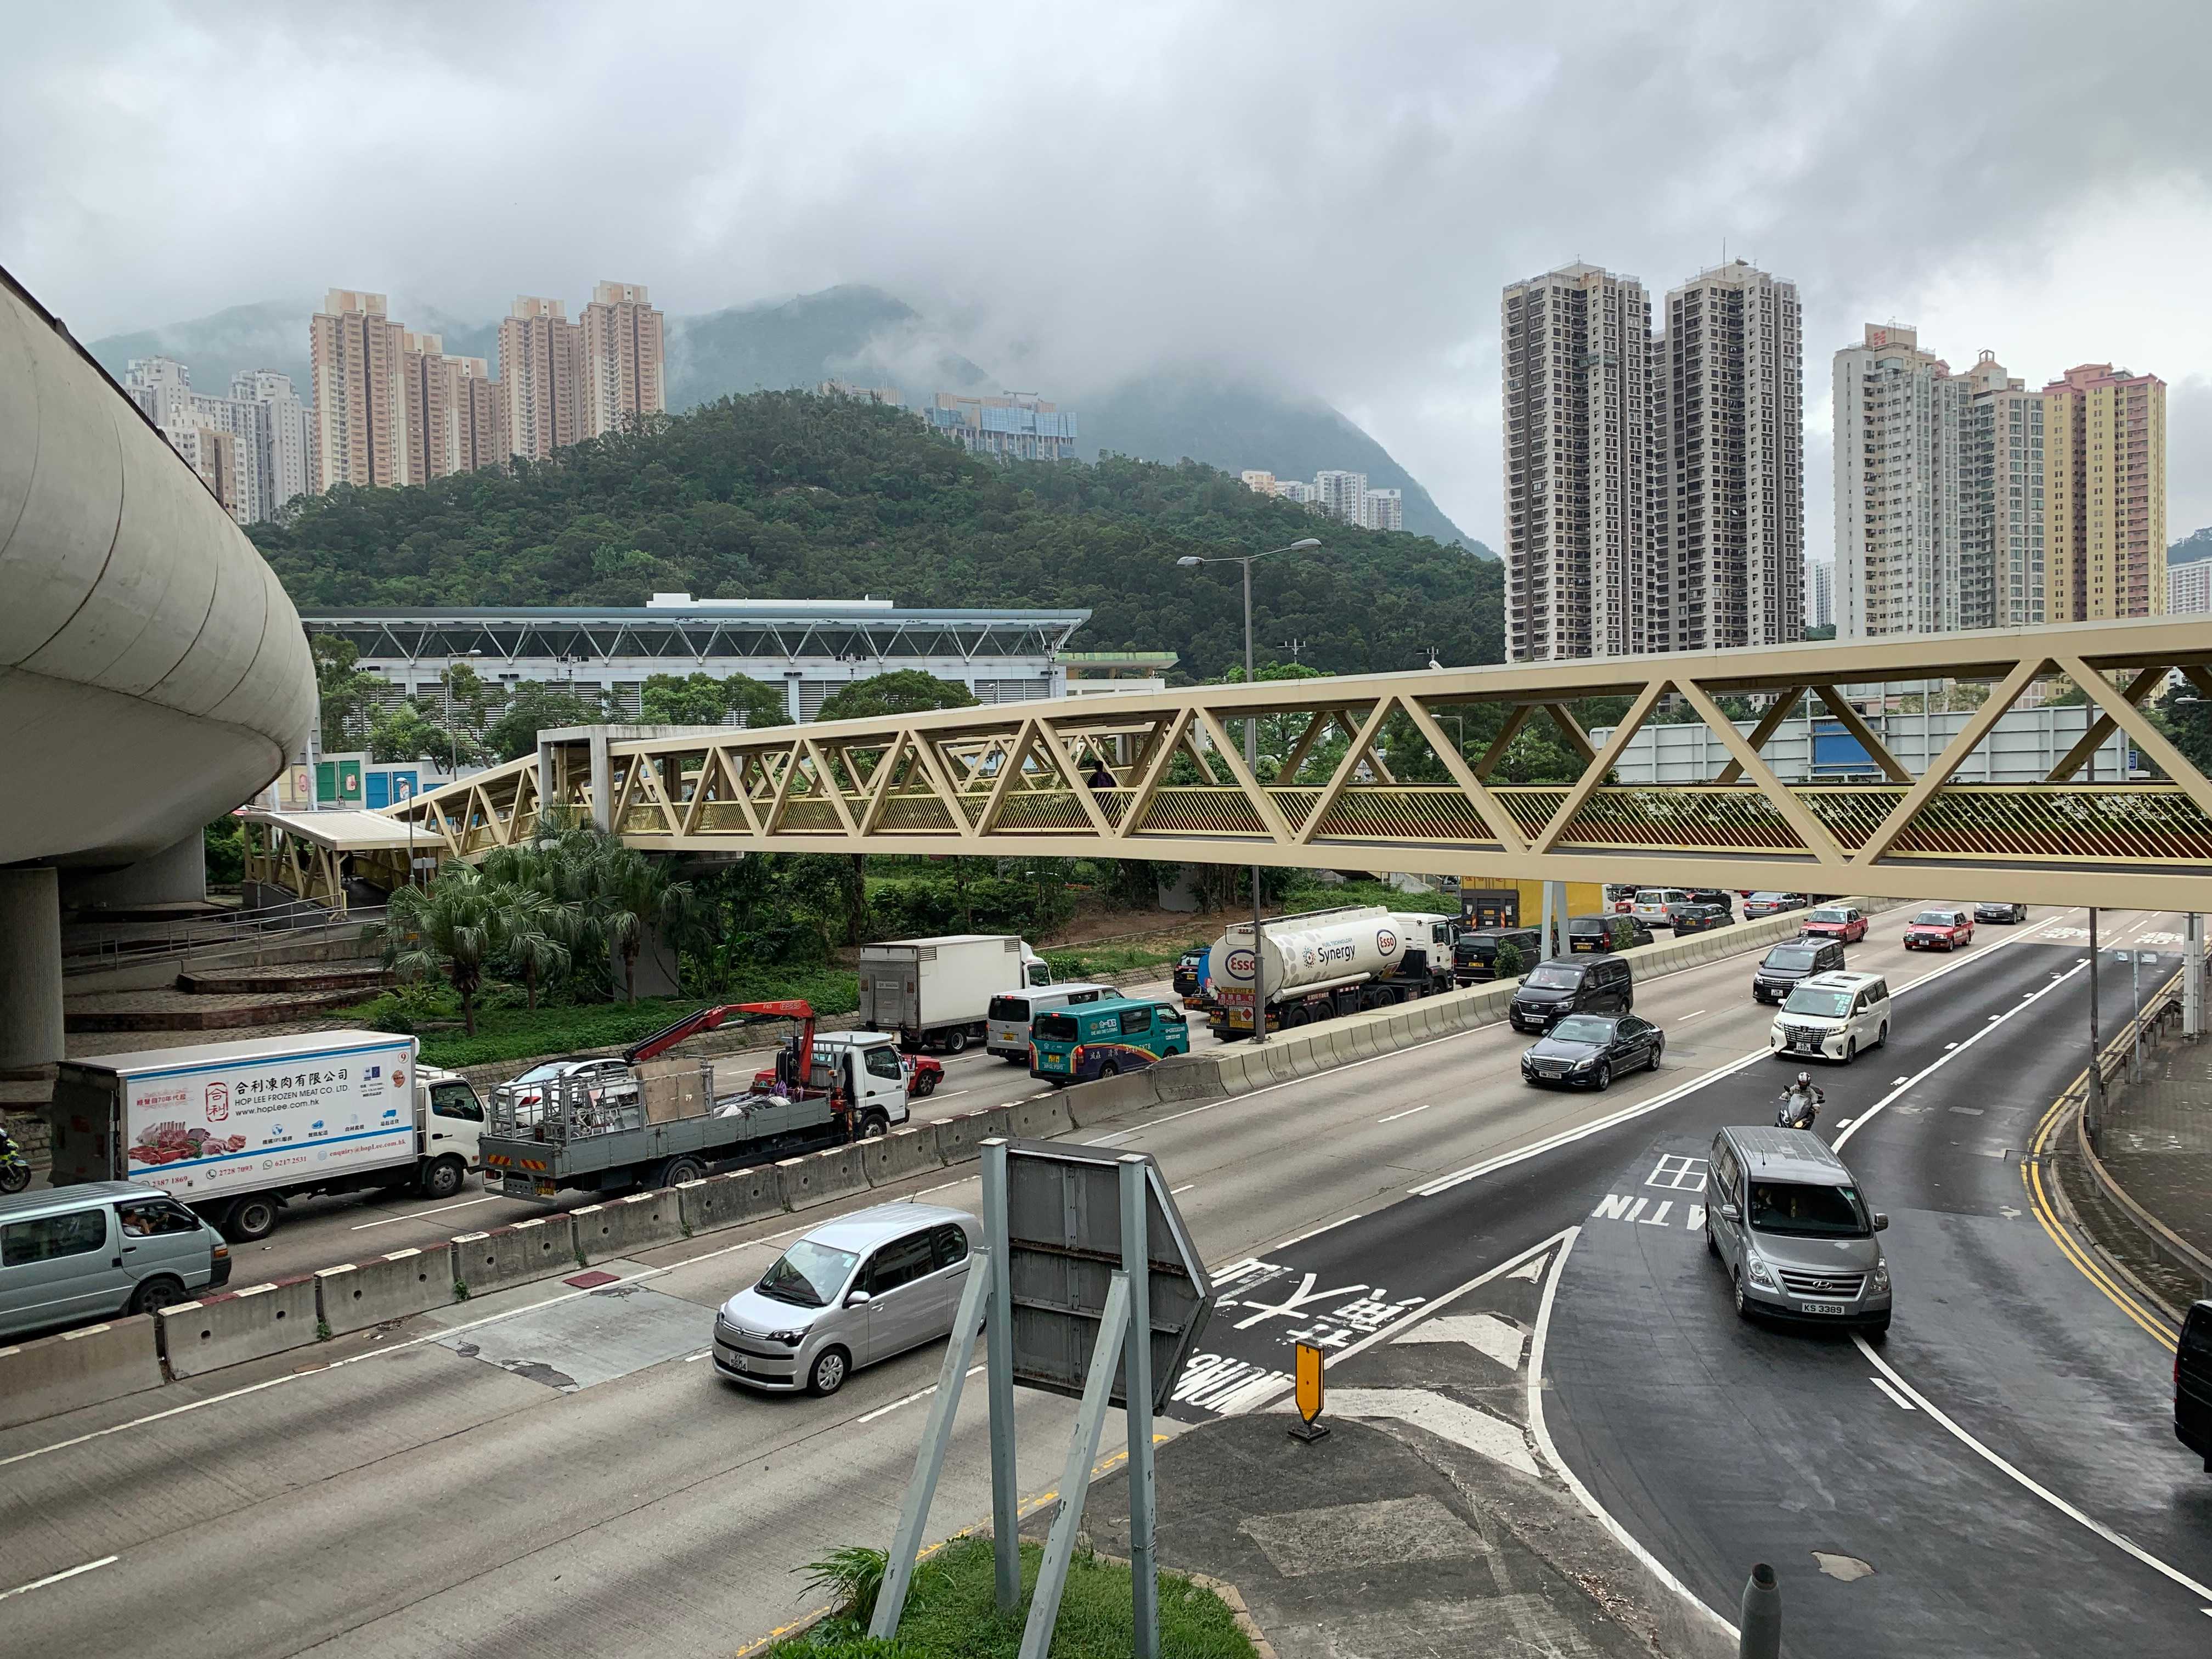 A busy scene shrouded in fog as a divided highway runs underneath the visitor, covered in cars, as a pedestrian bridge crosses the highway, spanning toward the distance, which shows some heavily forested small mountains punctured by many tall high rise buildings